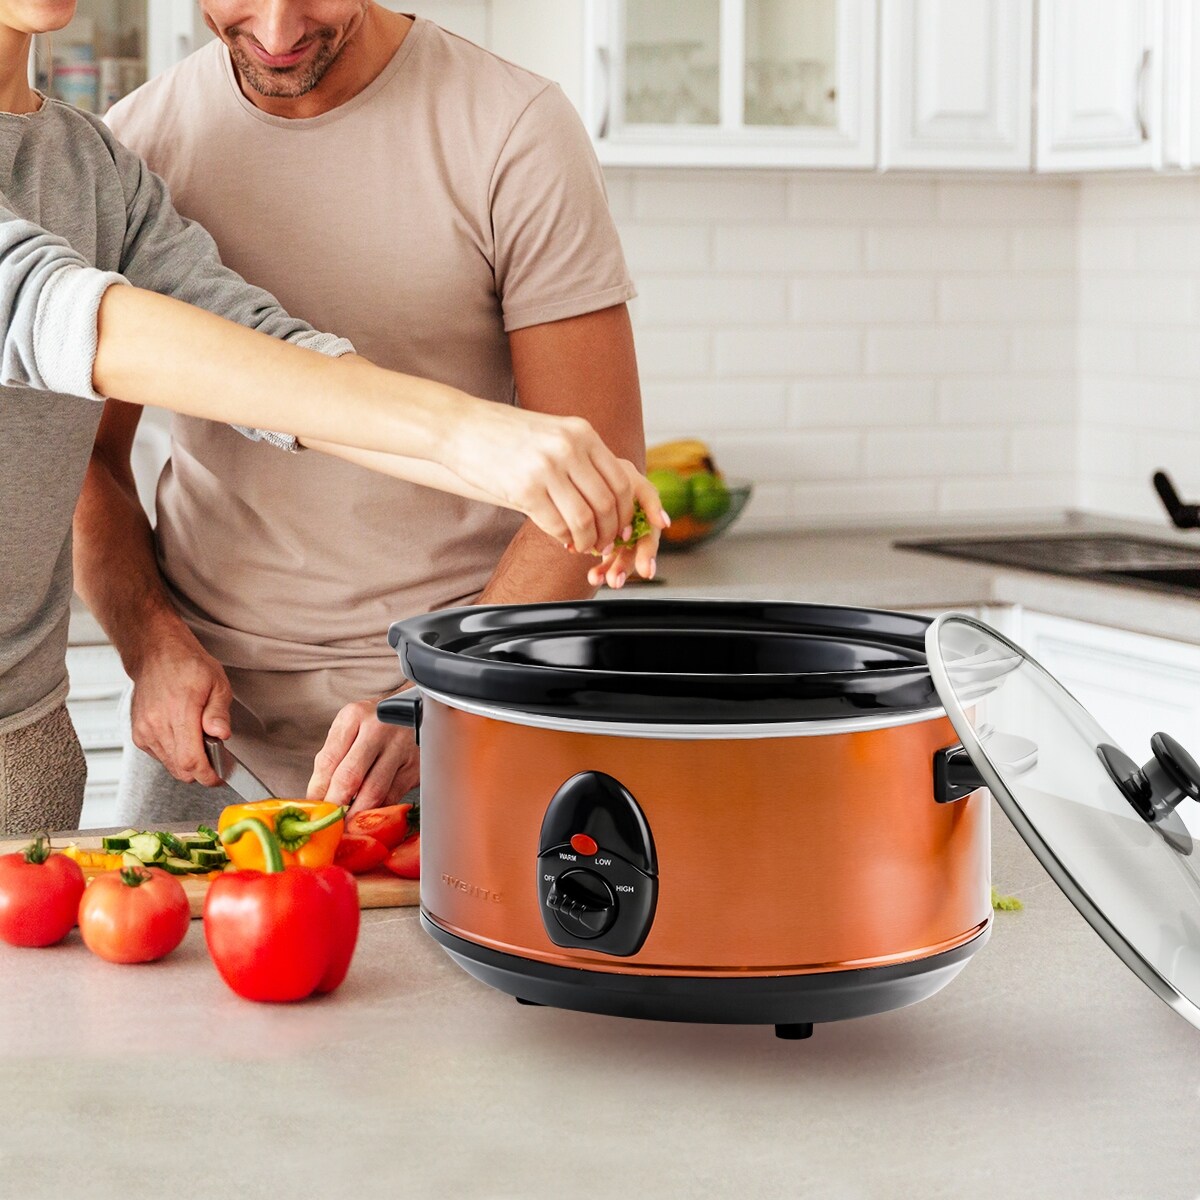 https://ak1.ostkcdn.com/images/products/is/images/direct/674ded7710bc8d0e979522d444b812091259677b/Ovente-Slow-Cooker-Crockpot-3.5-Liter-with-Removable-Ceramic-Pot-3-Cooking-Setting-and-Heat-Tempered-Glass-Lid%2C-SLO35-Series.jpg